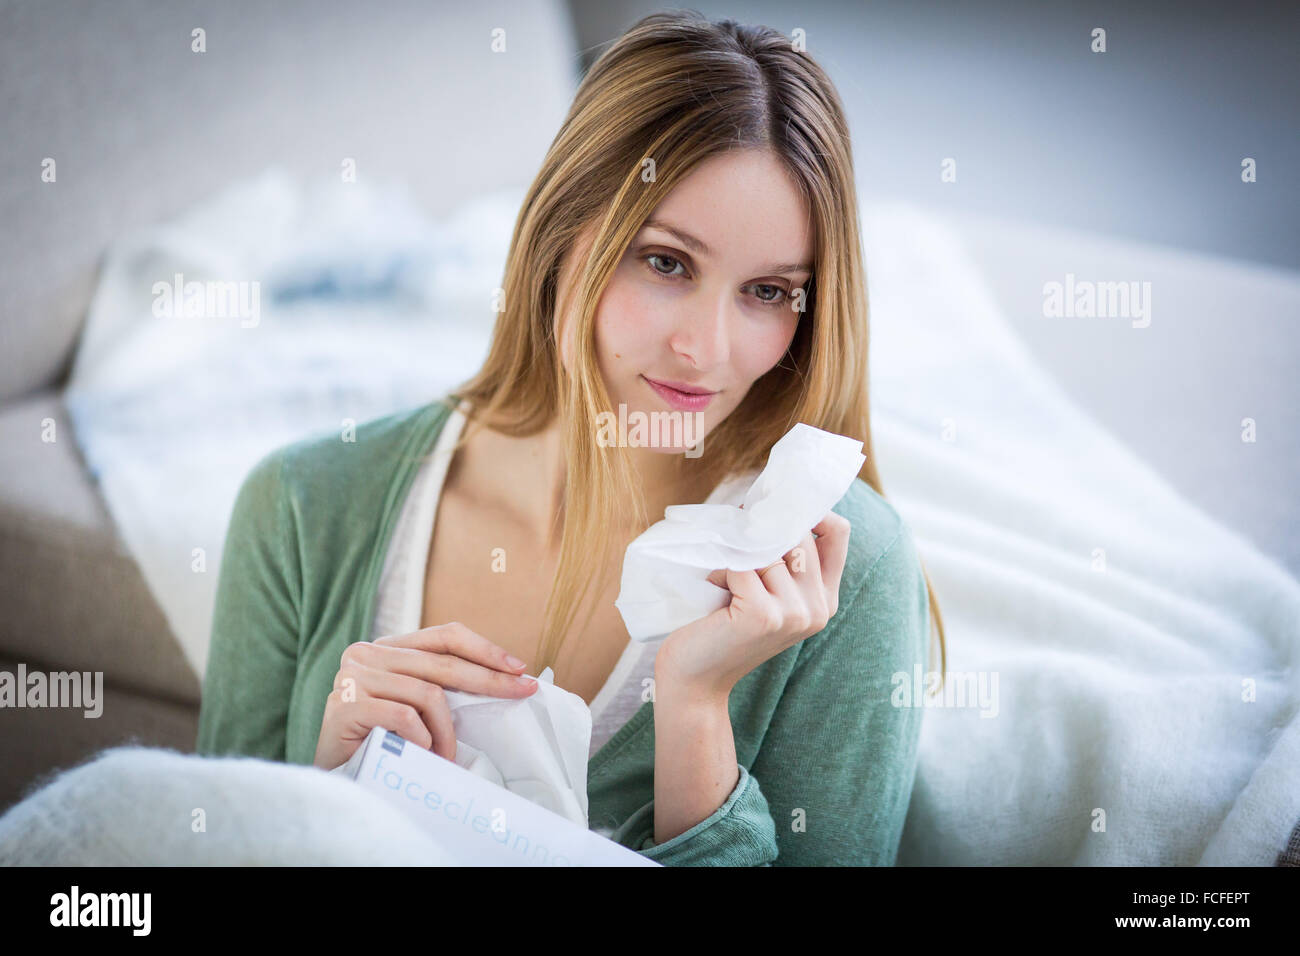 Woman with a cold using tissue. Stock Photo